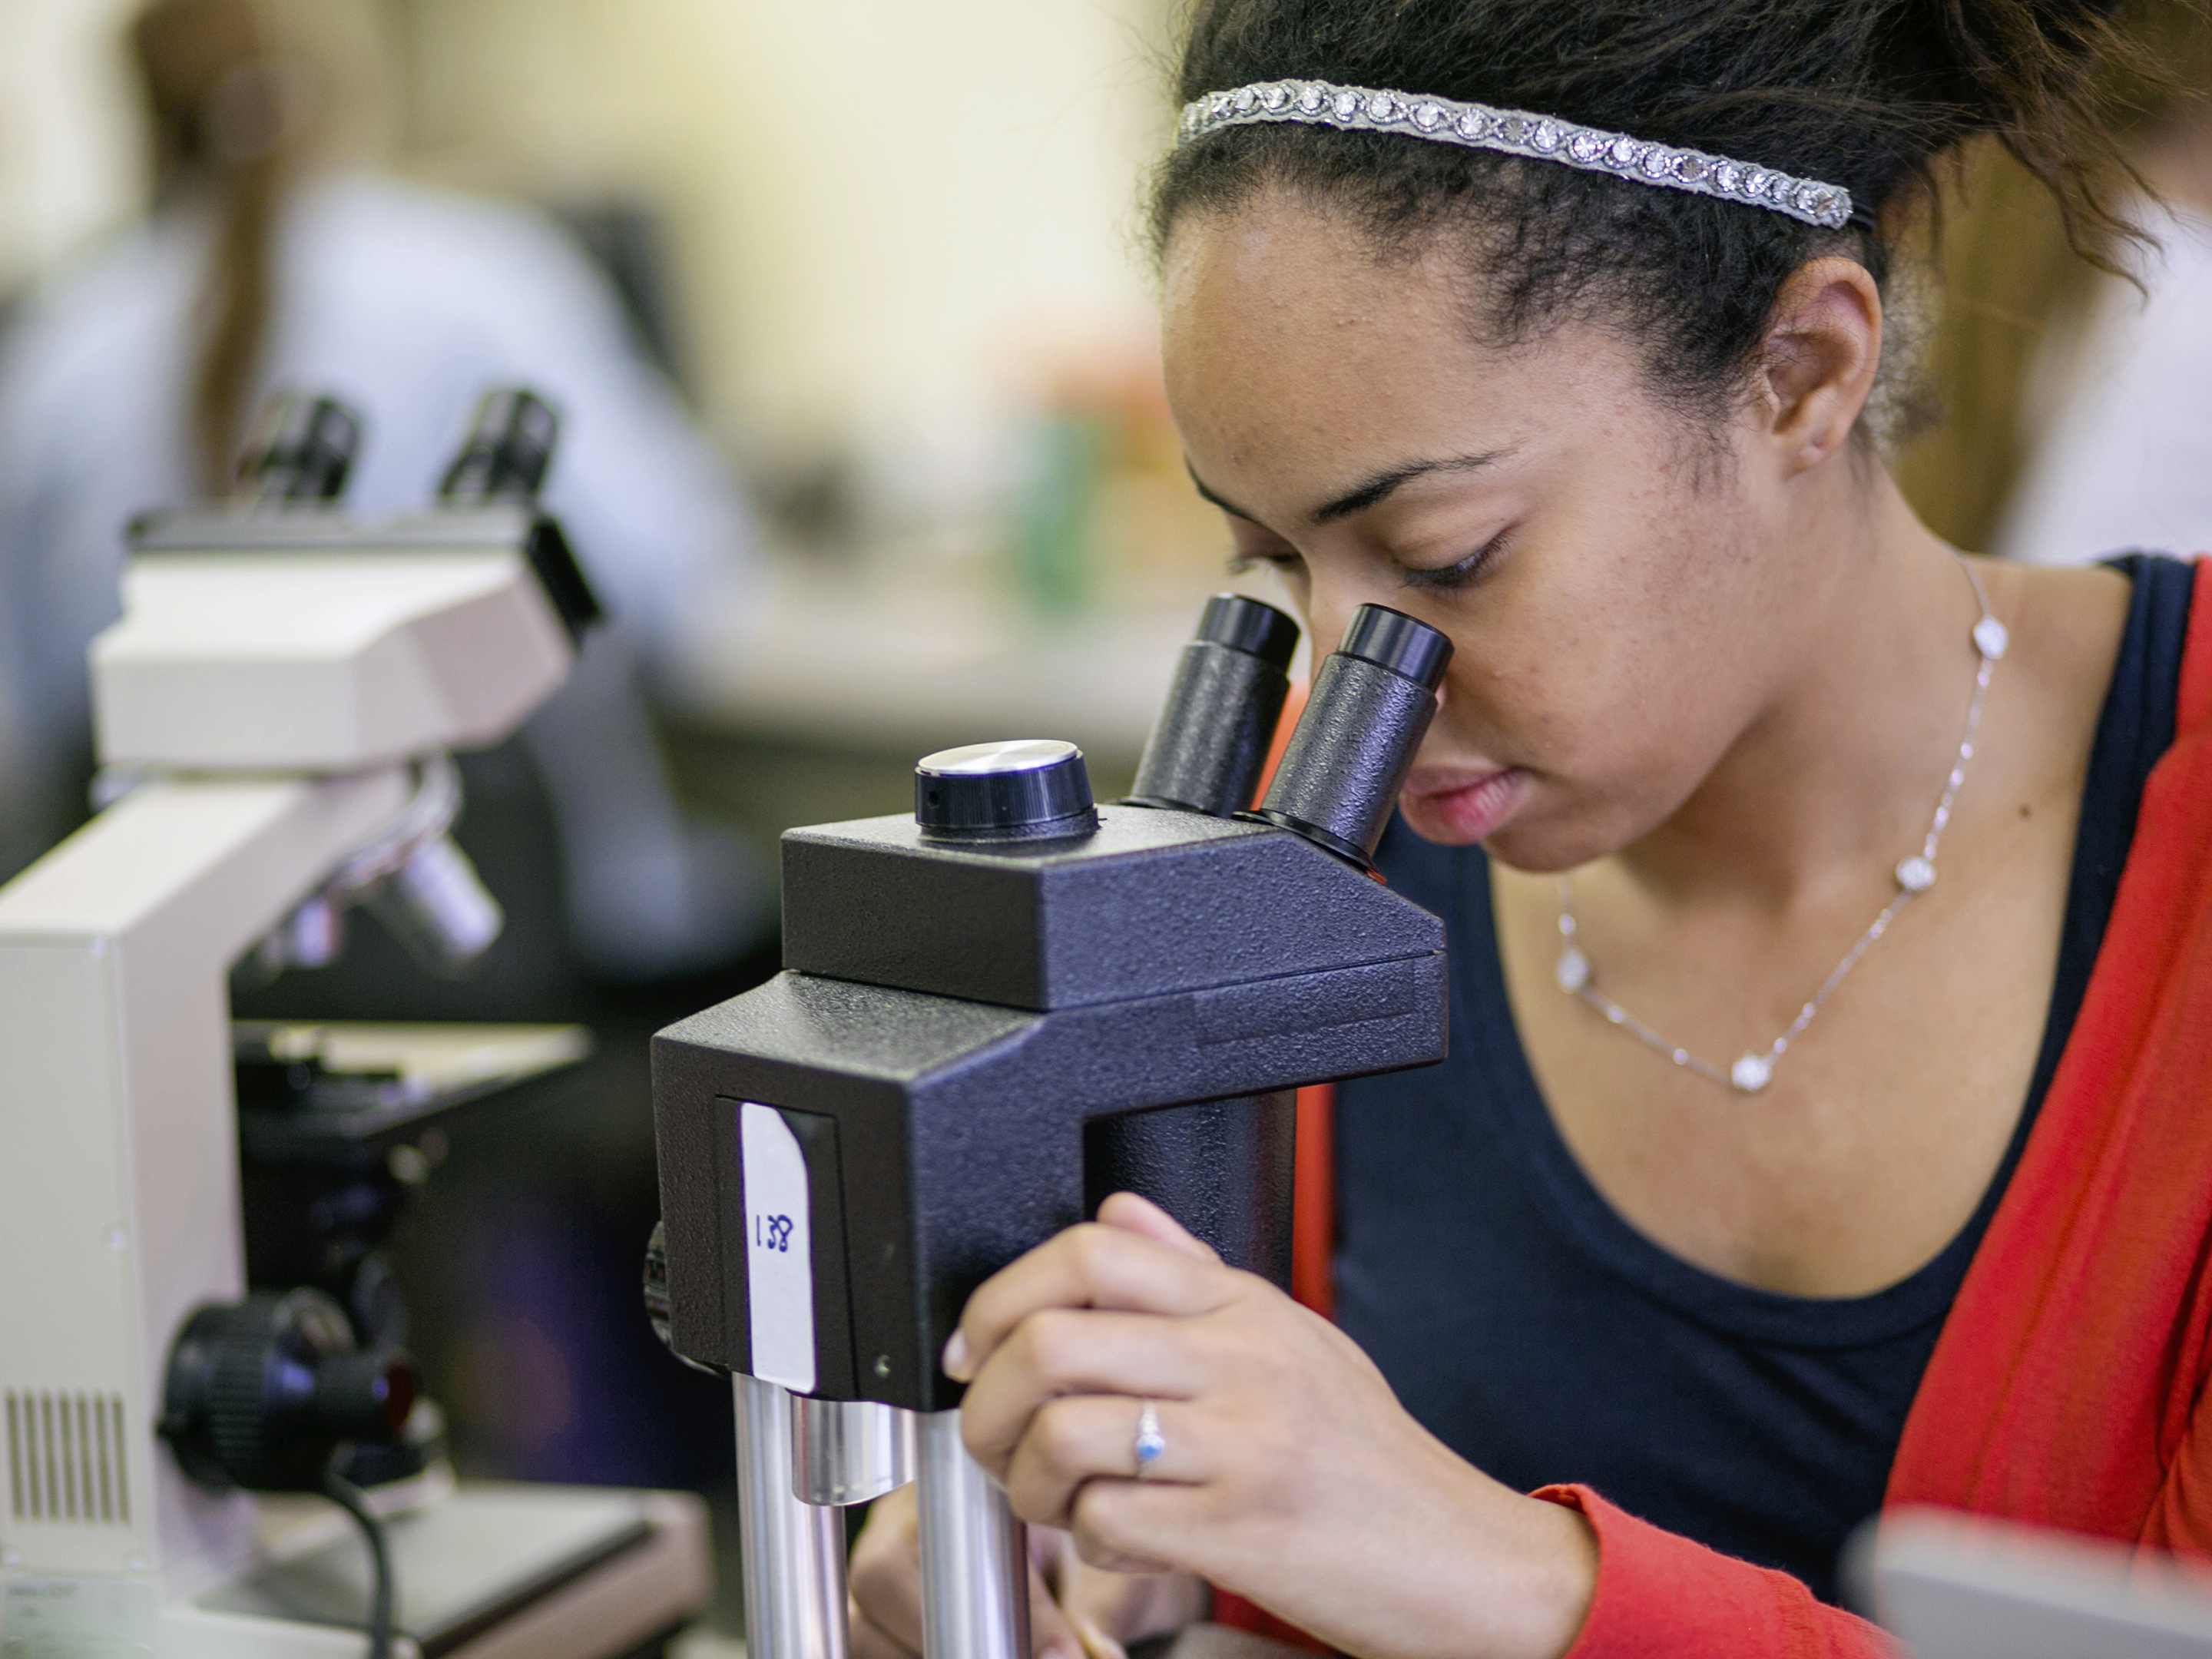 A young woman looks through a microscope.